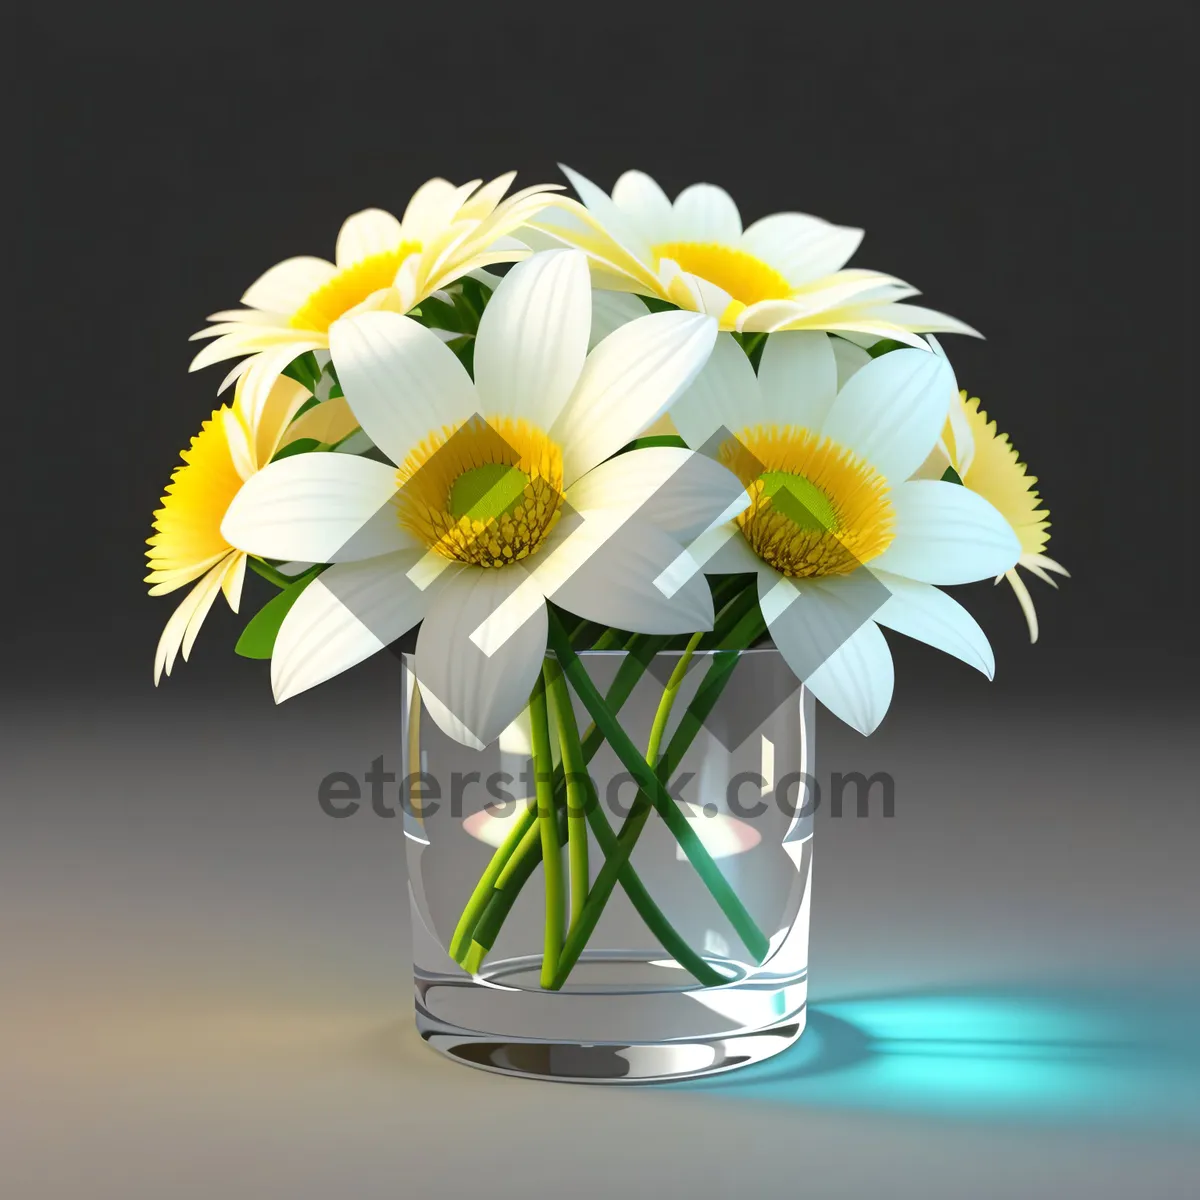 Picture of Daisy Blossom - Fresh White Petals in Bloom